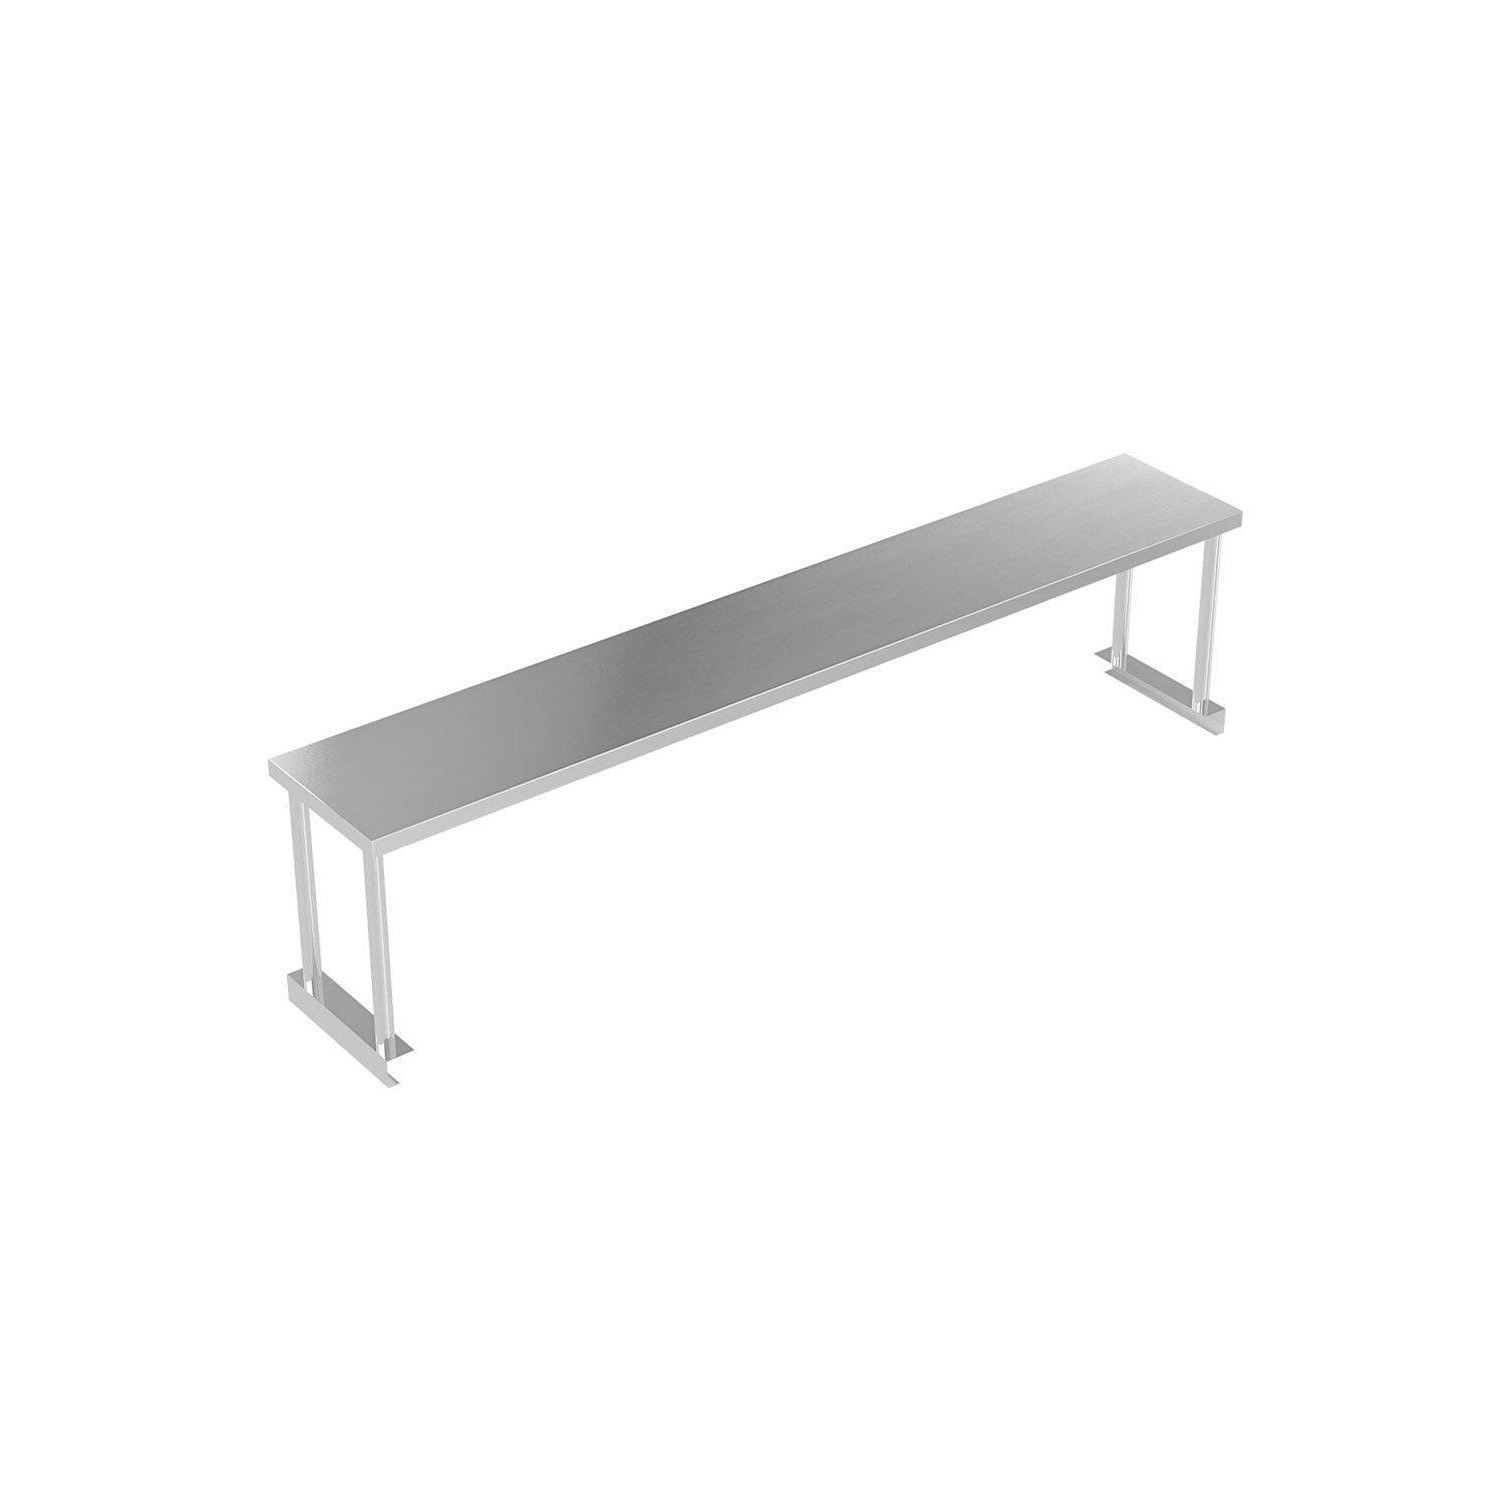 Stainless Steel Kitchen Prep Work Table Bench Over Shelf - image 1